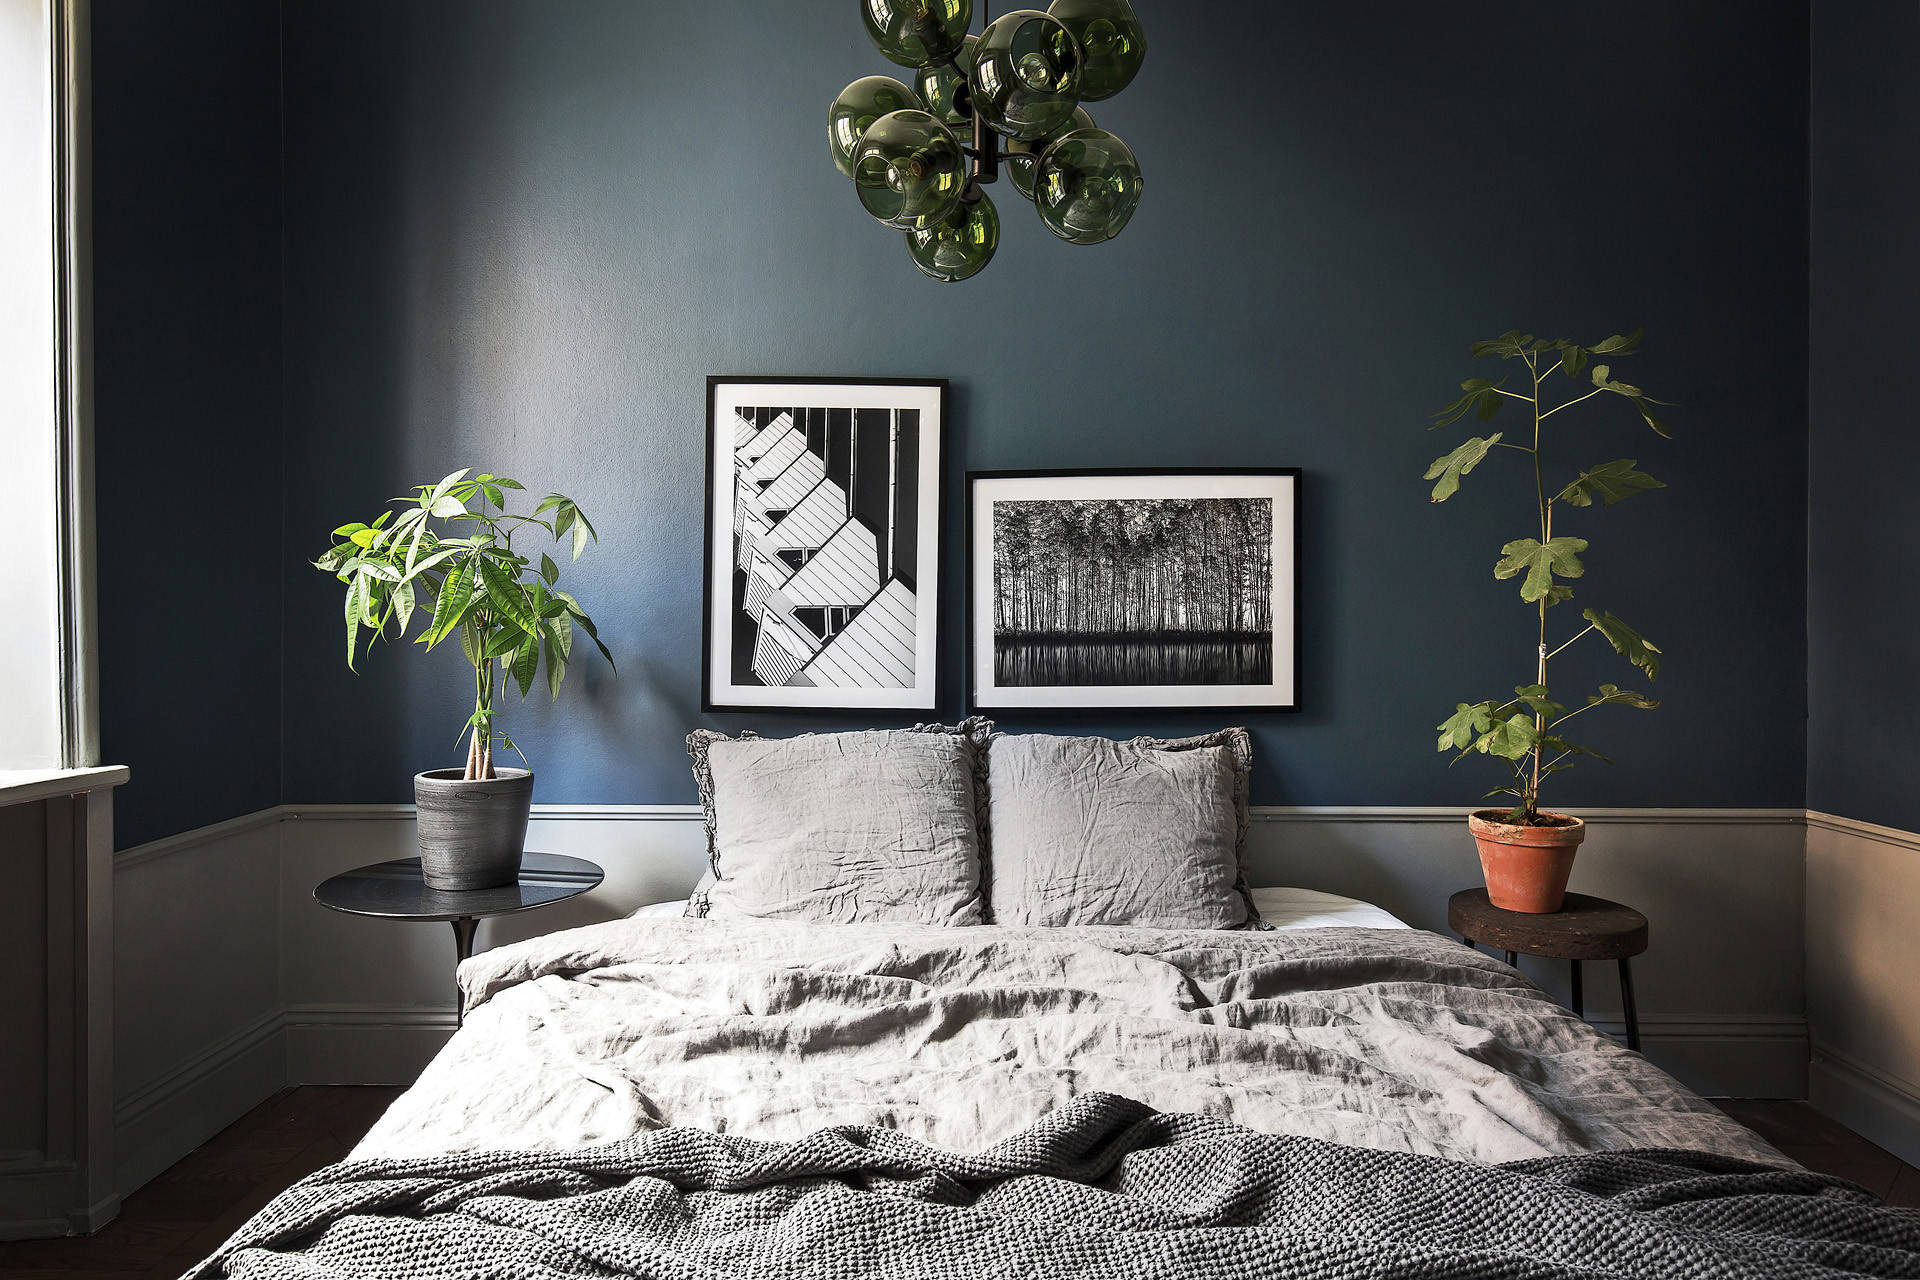 Small Plants For Bedroom
 How to Decorate a Small Bedroom